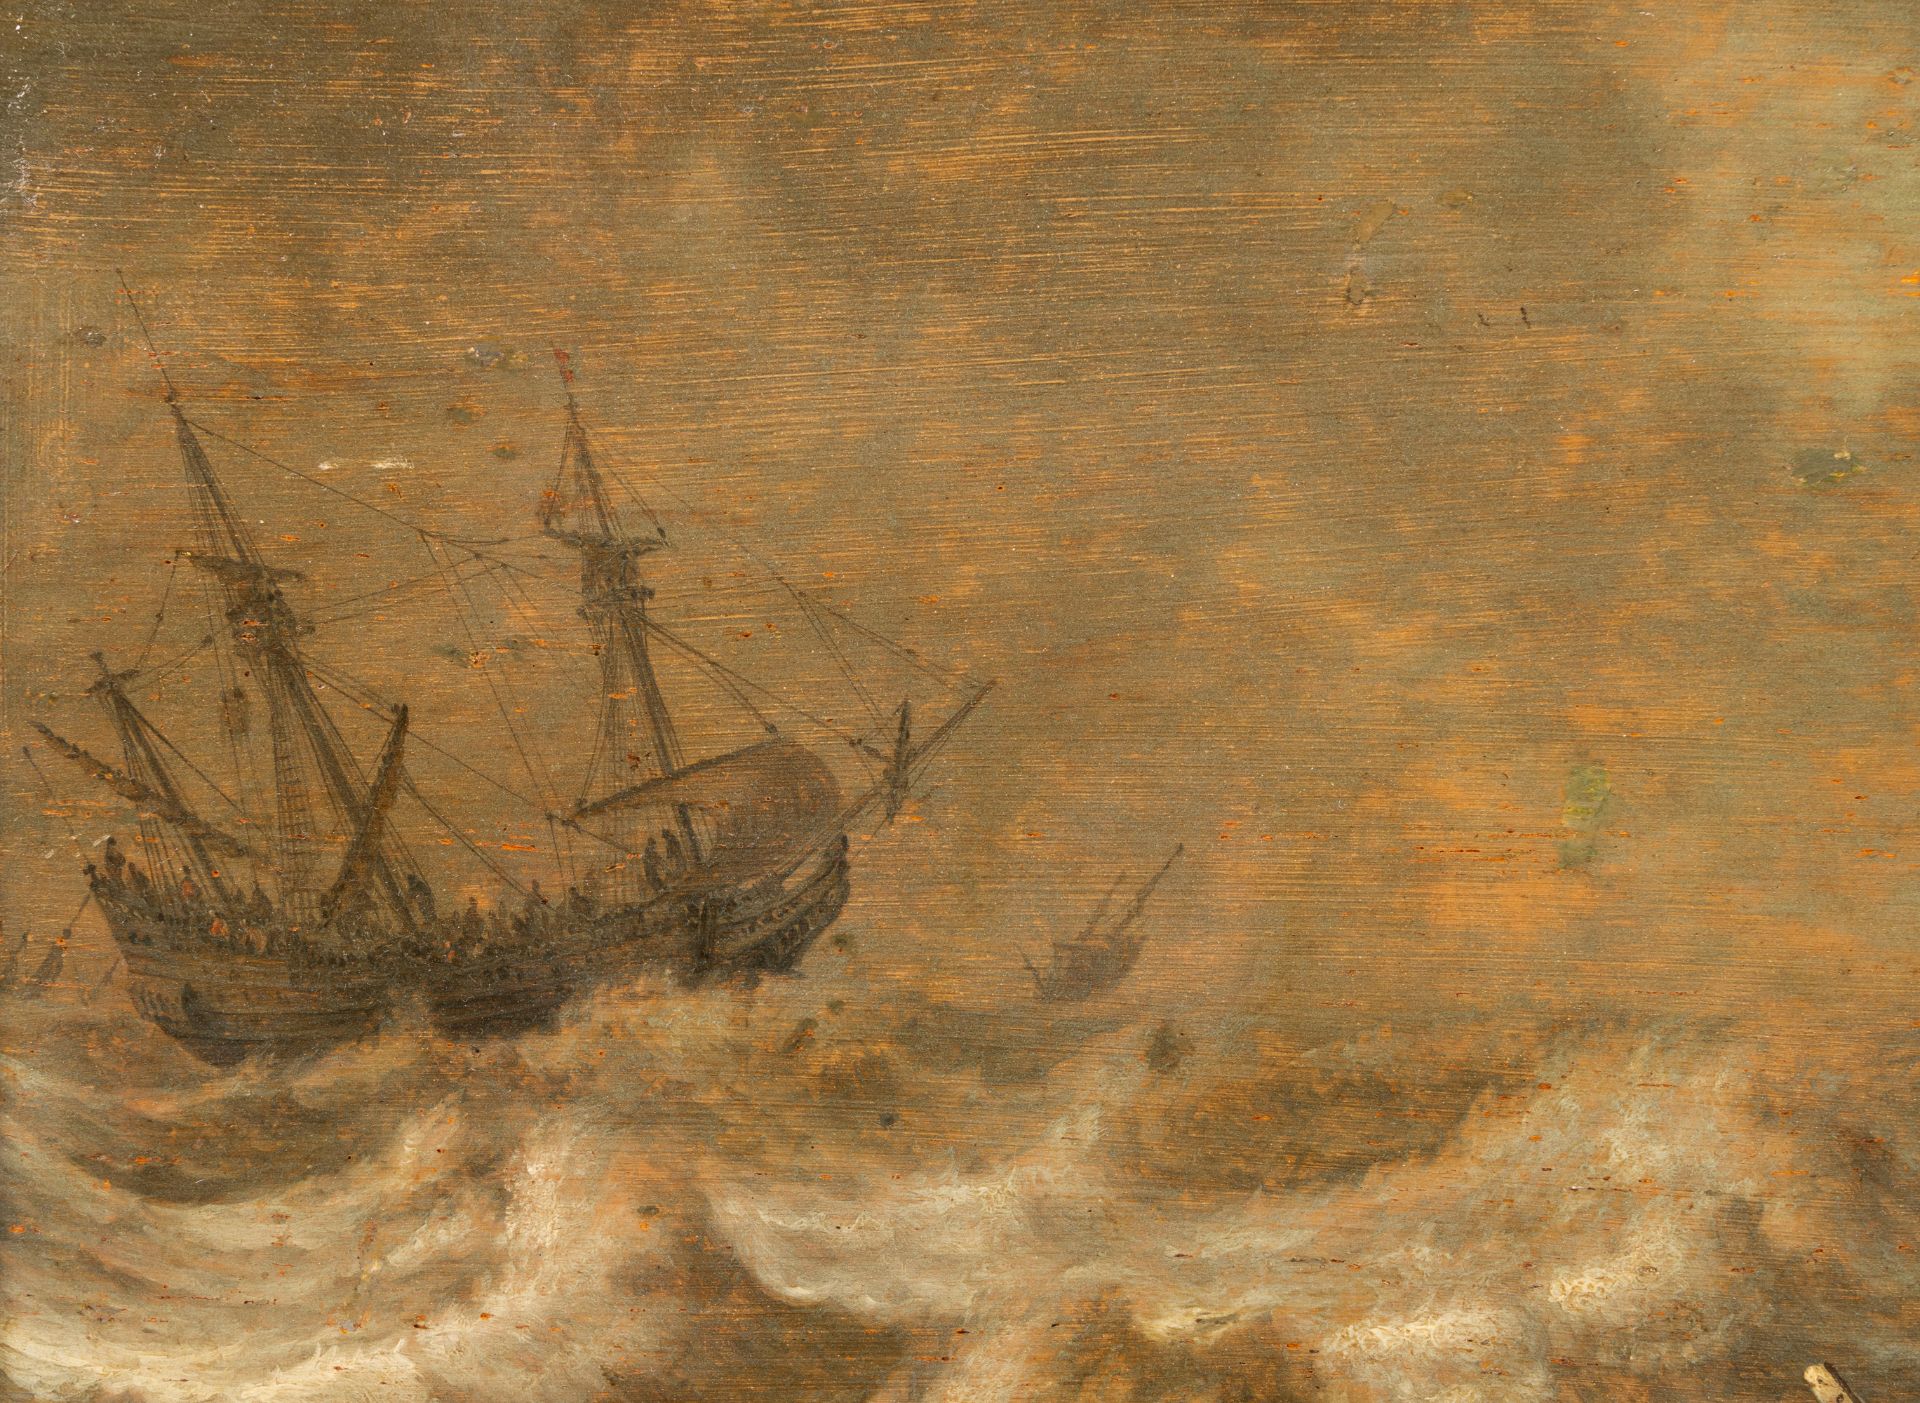 Pieter Mulier I (1615-1670): Shipping on a stormy sea, oil on panel - Image 5 of 6